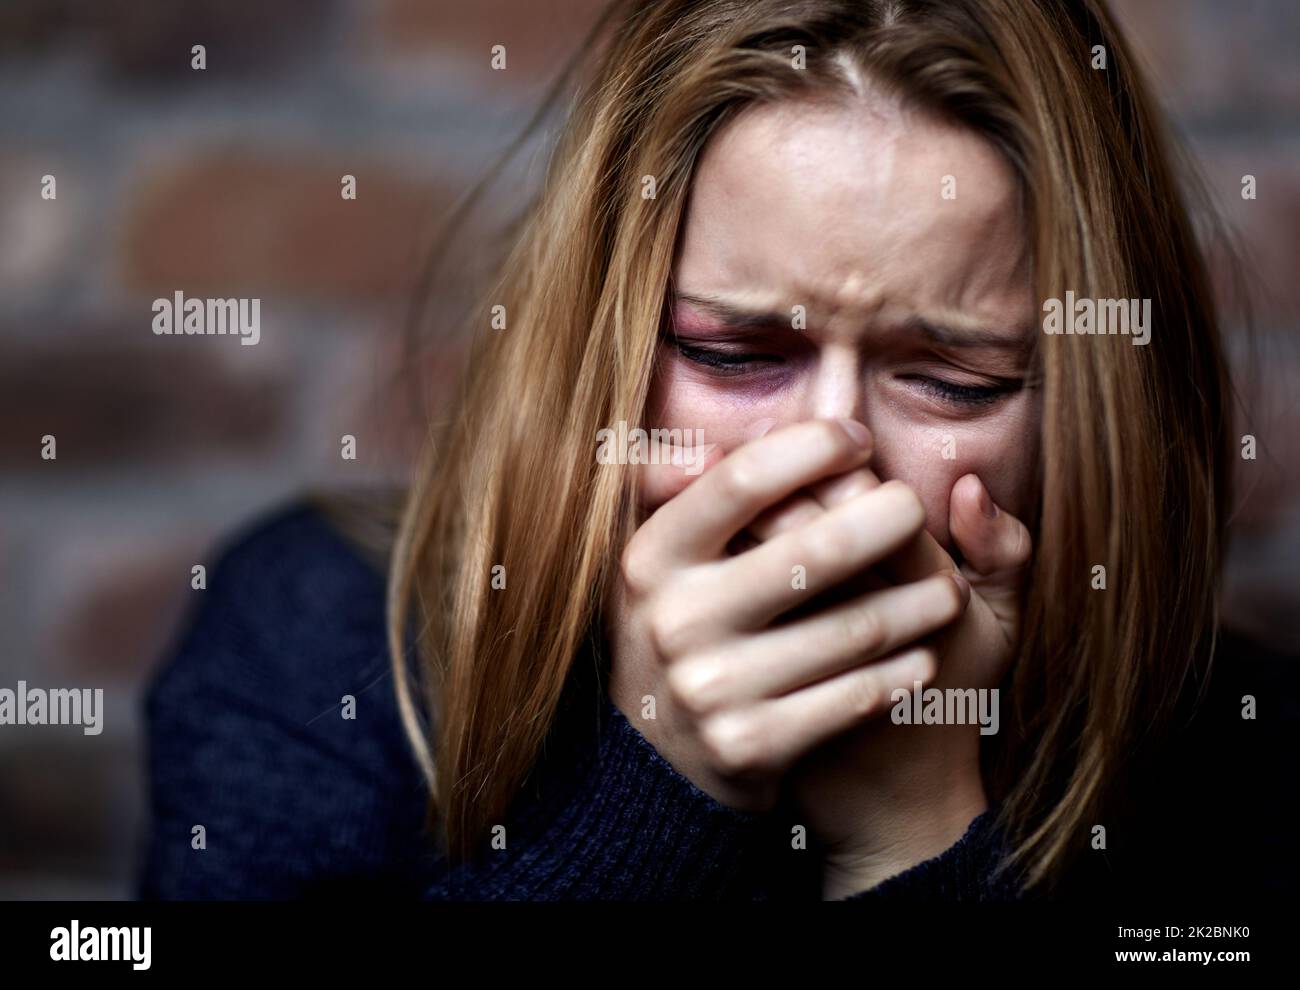 Emotionally victimized. Abused young woman crying hard and covering her mouth. Stock Photo